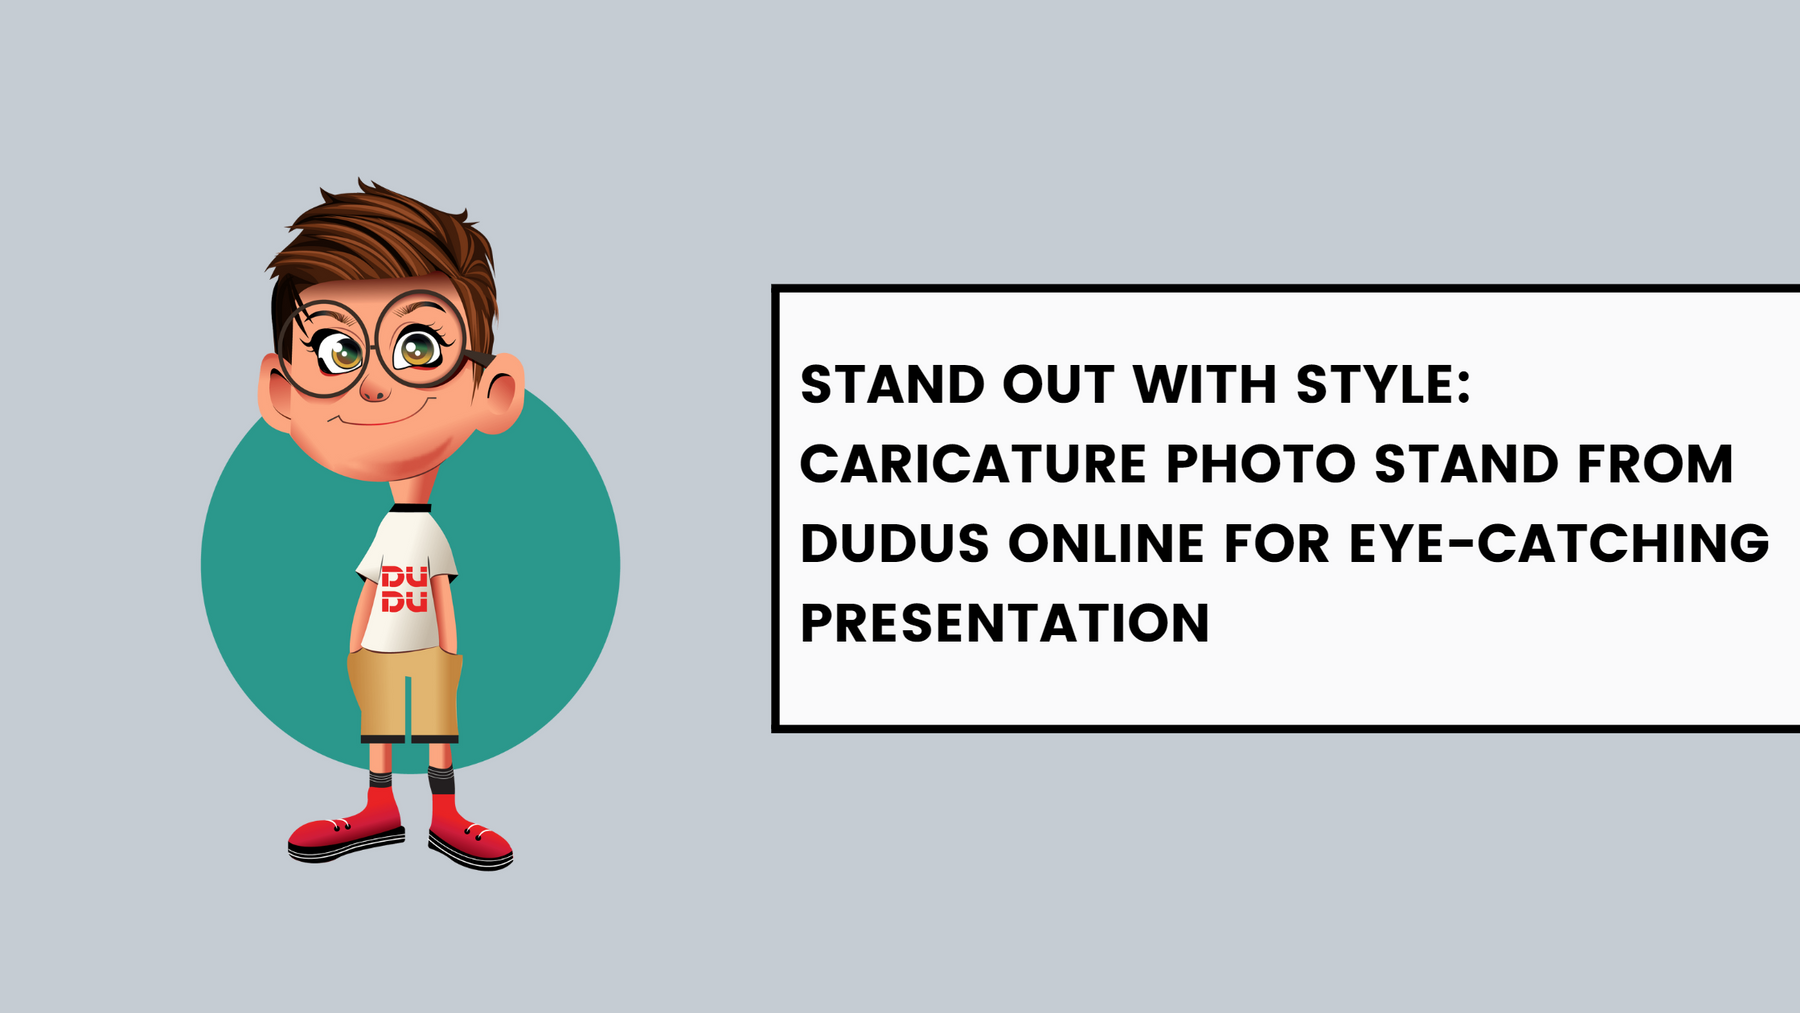 Stand Out With Style: Caricature Photo Stand From Dudus Online For Eye-Catching Presentation